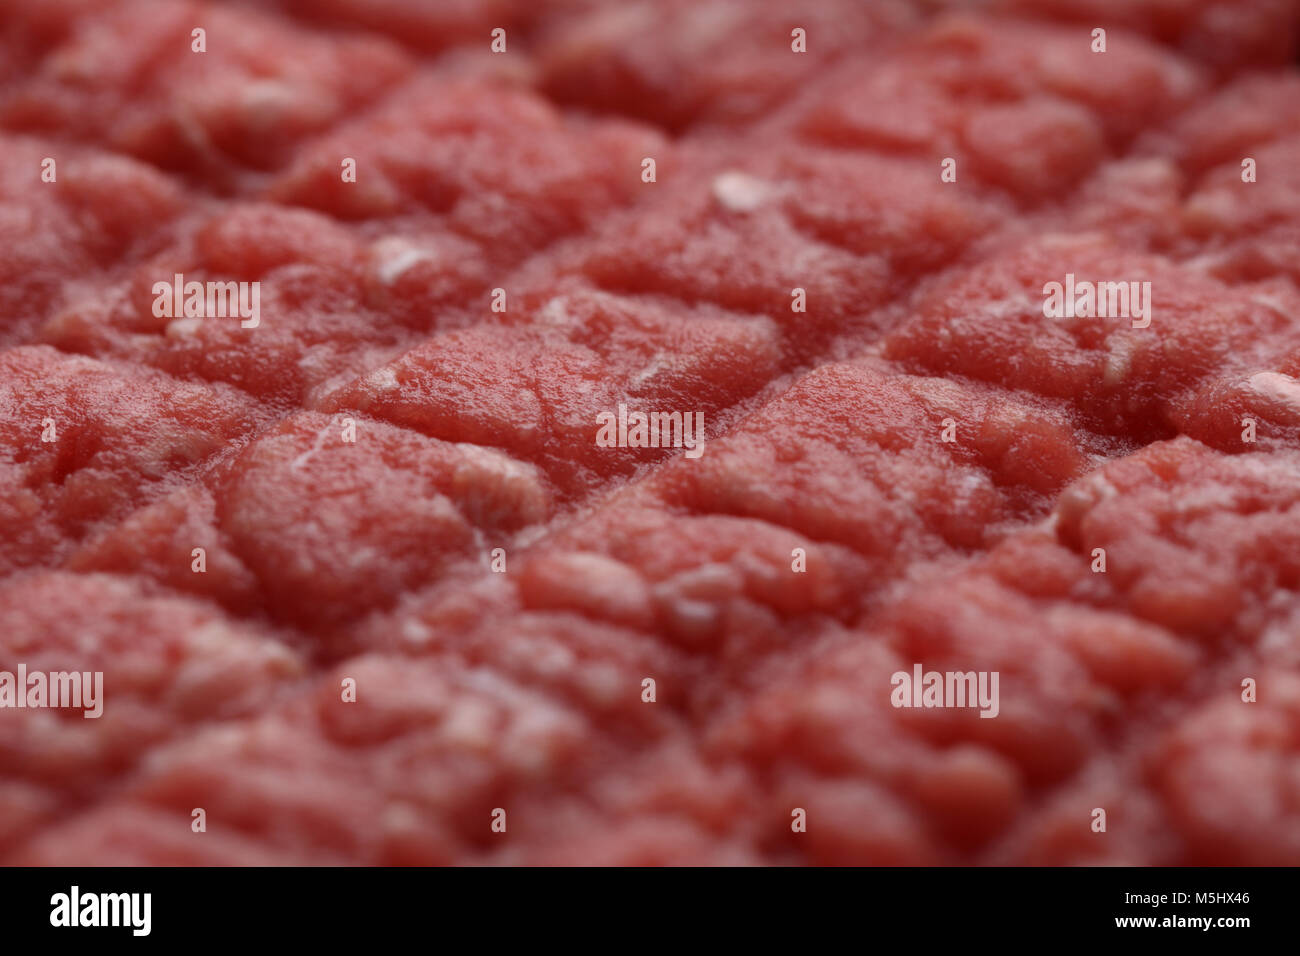 Texture of the surface of raw beef hamburger. Selective focus on the center Stock Photo